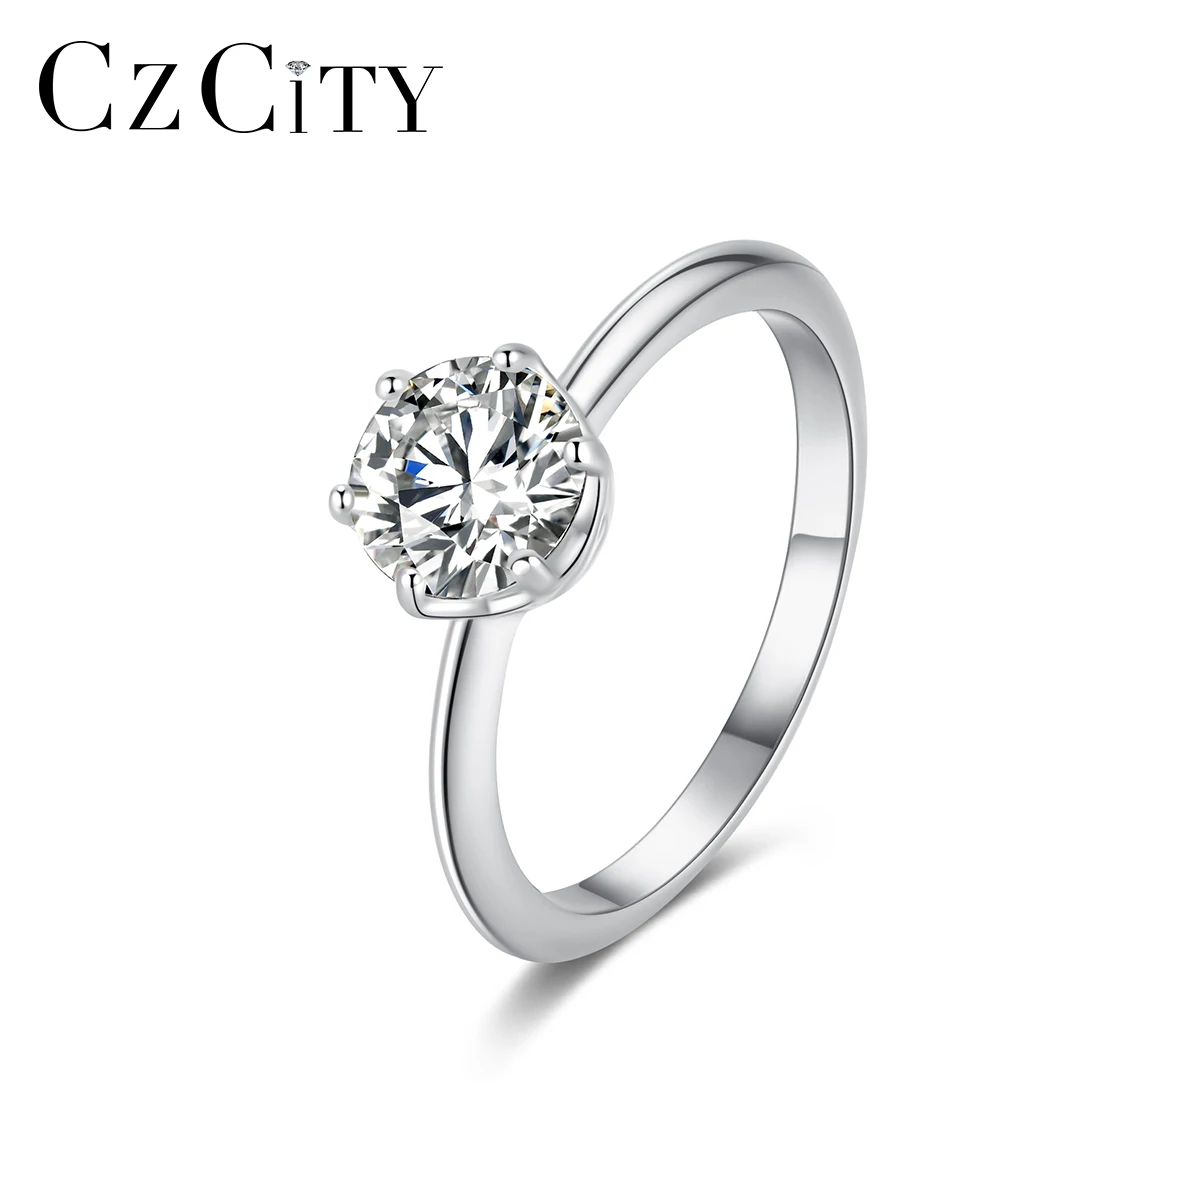 

CZCITY Sterling Silver S925 Finger Woman White Gold Plated Bling Moissanite Diamond Eternity 925 Engagement Ring